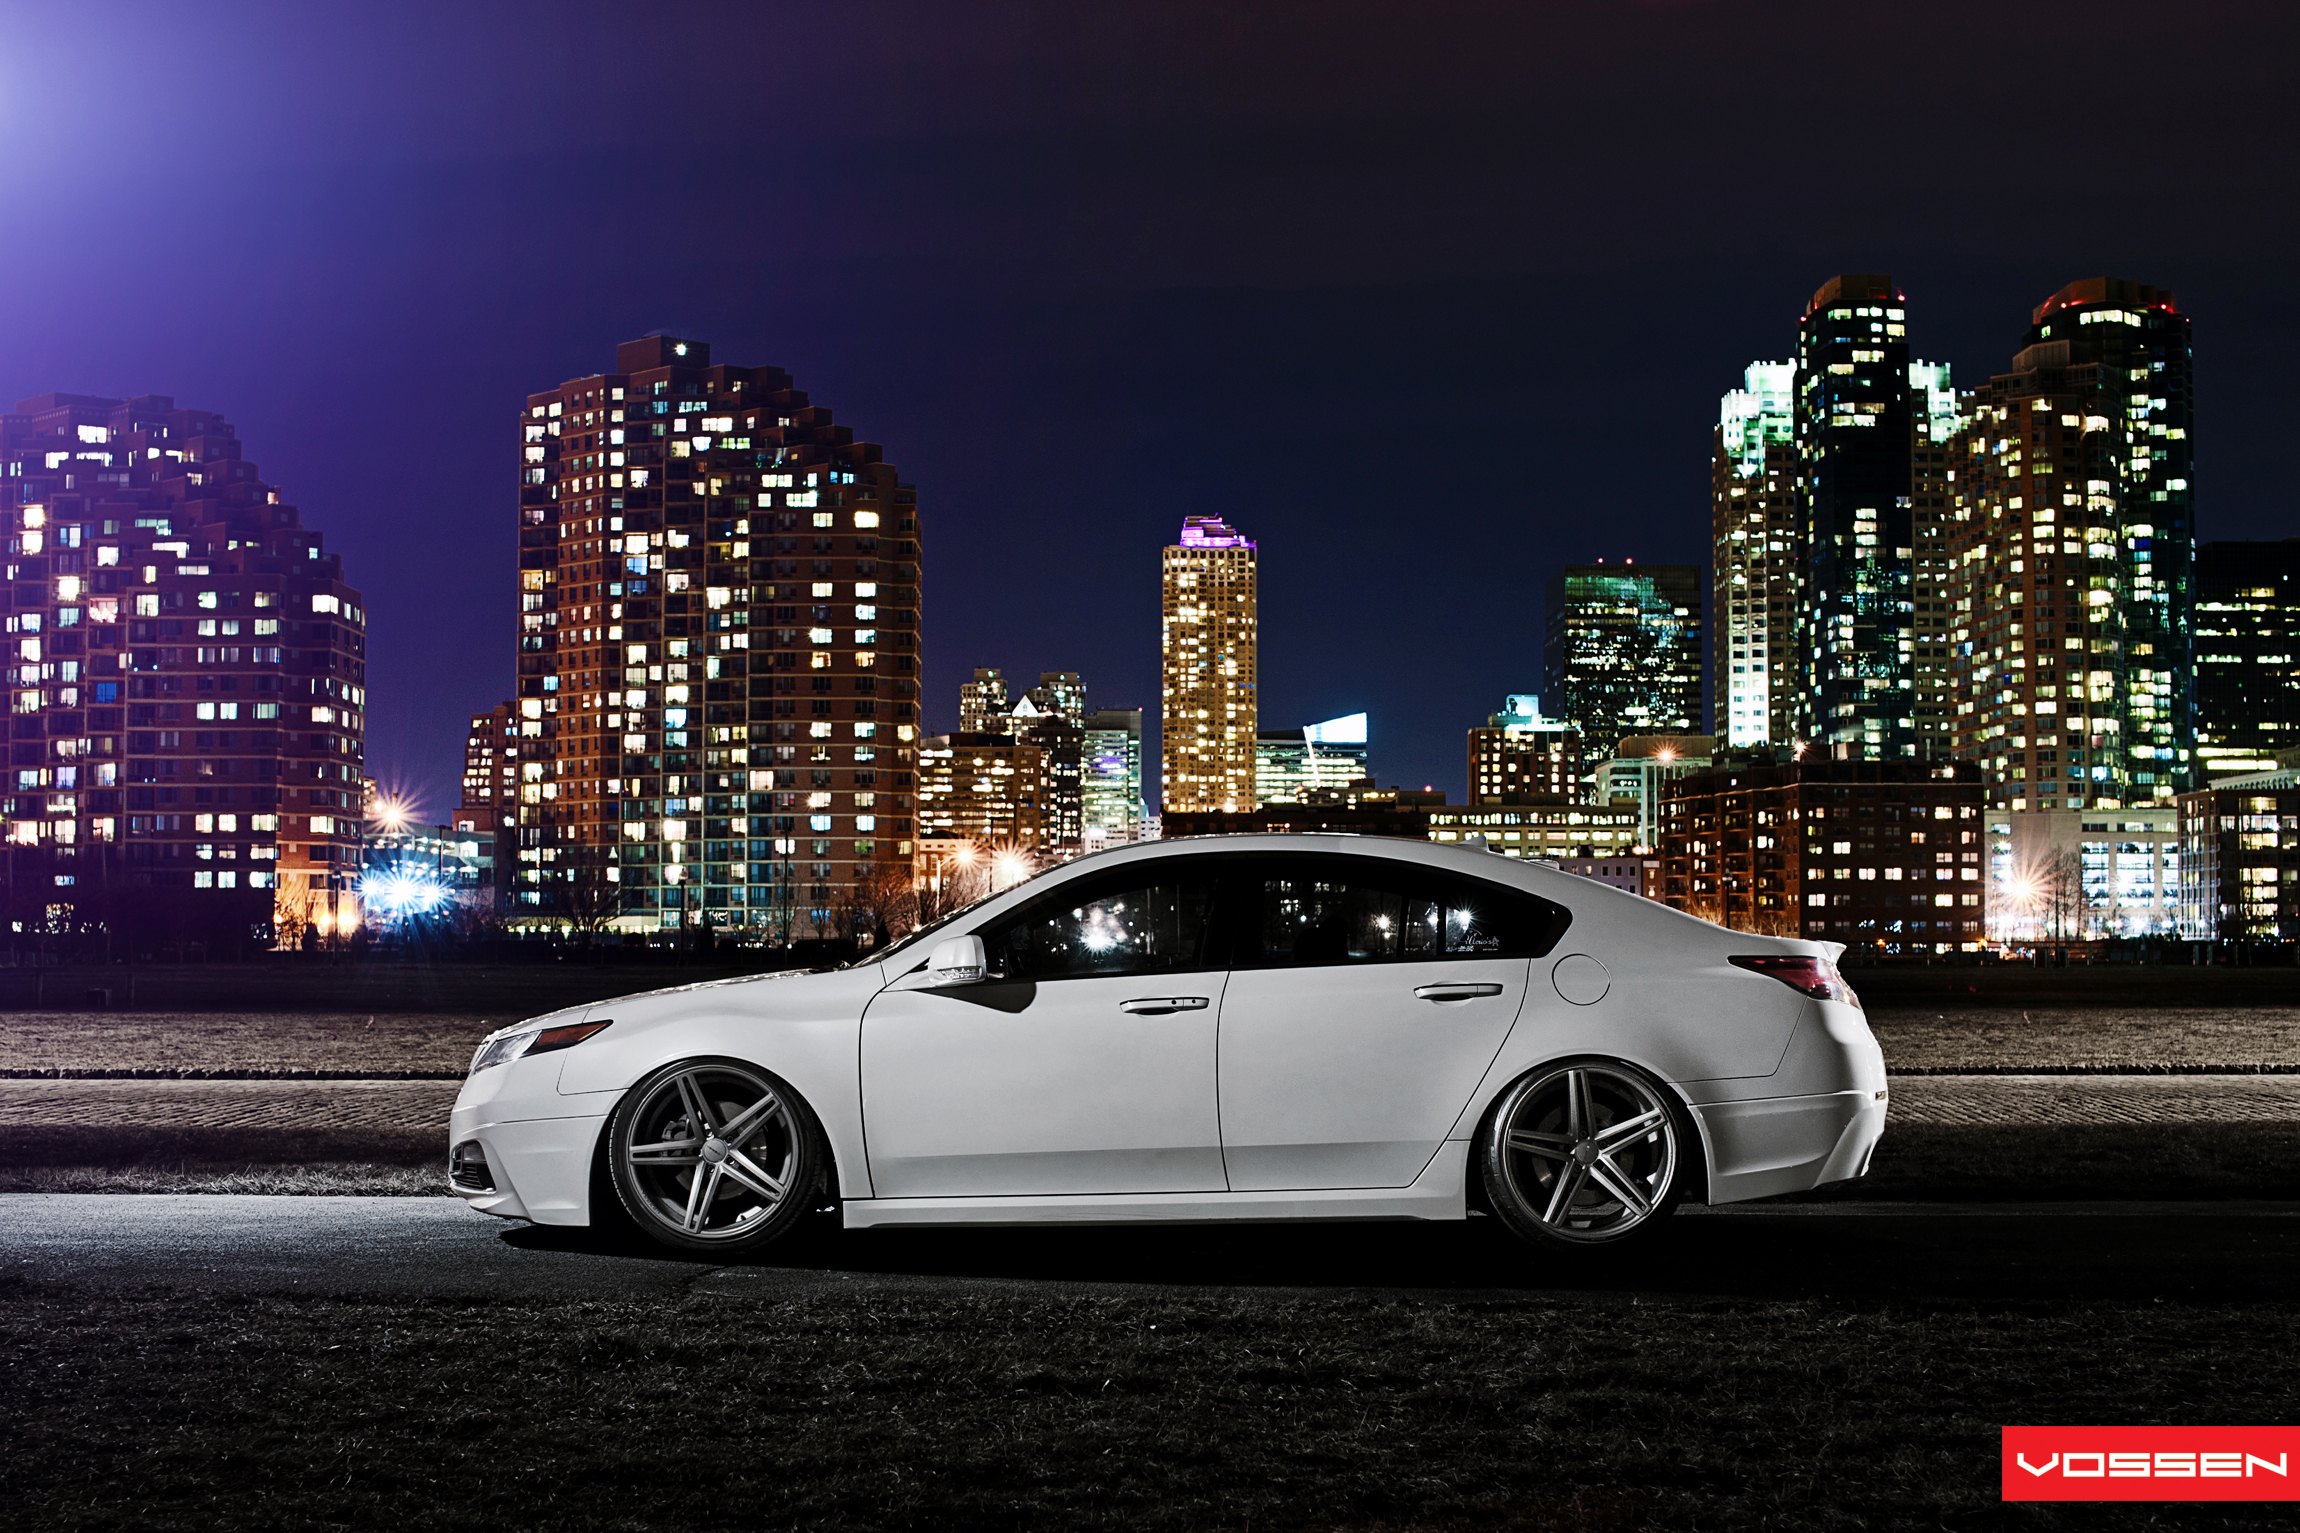 White Acura TL with Aftermarket Side Skirts - Photo by Vossen